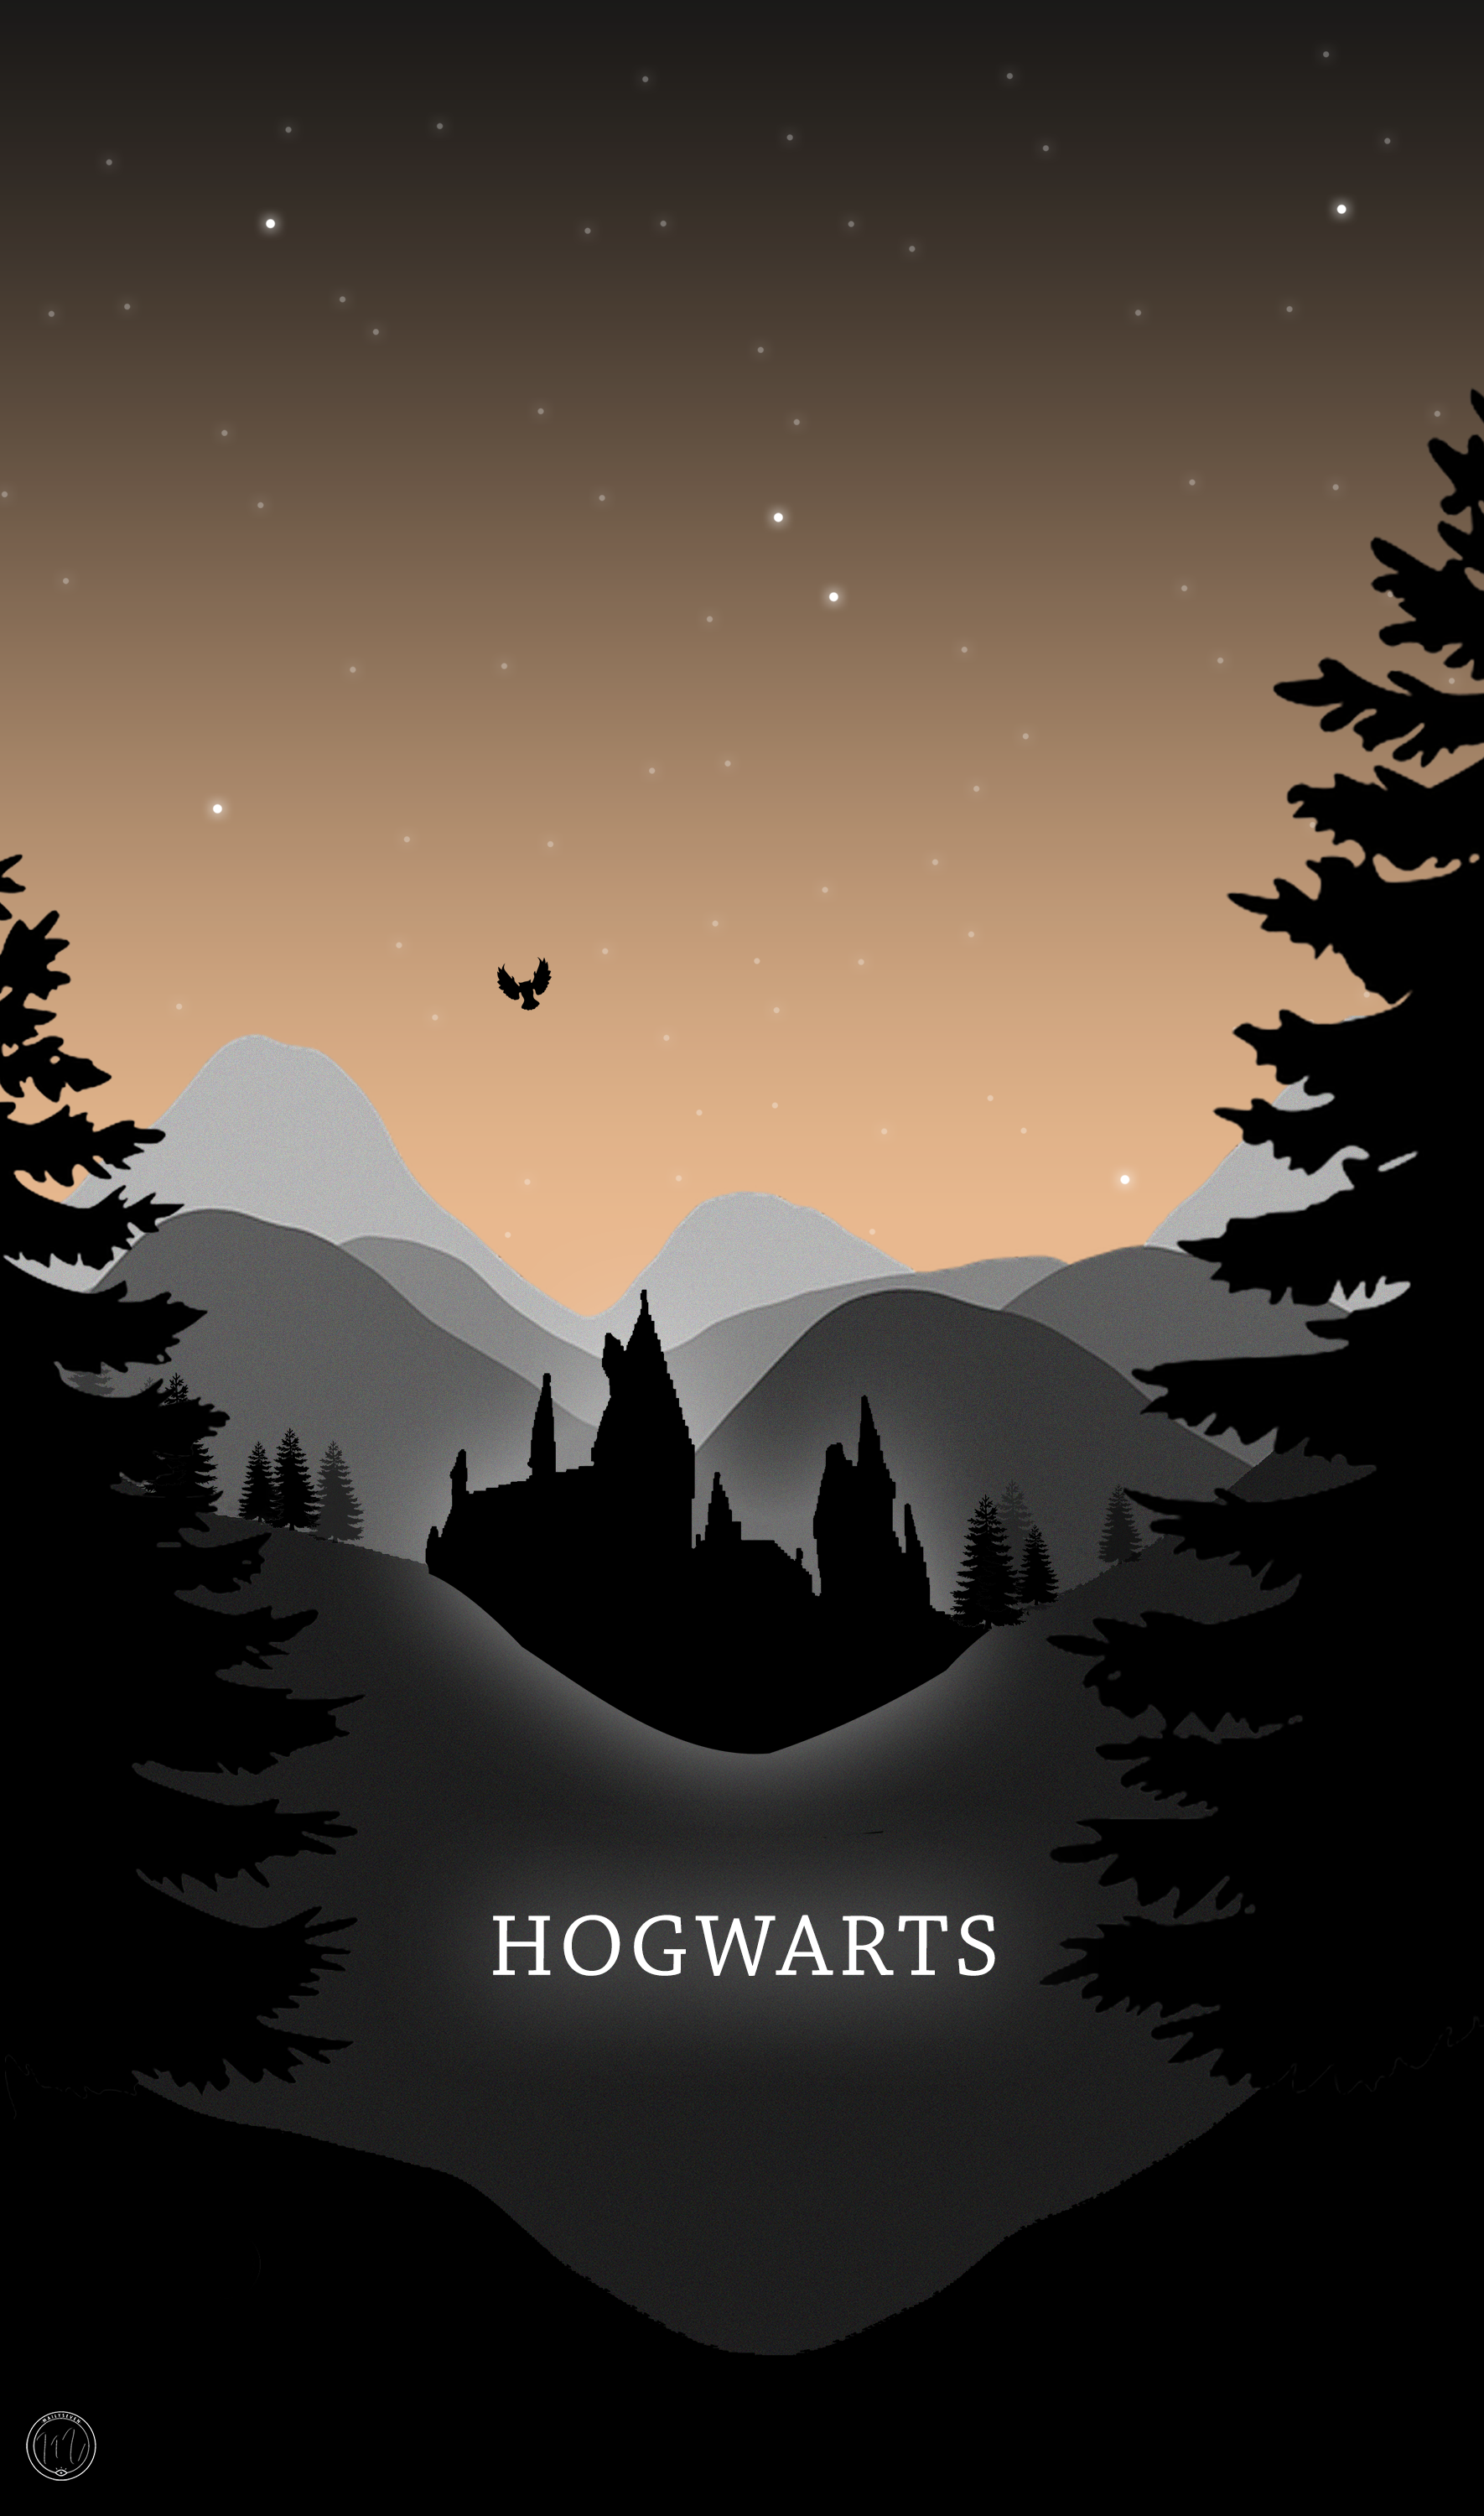 Harry Potter Wallpaper for Phone with Hogwarts - Wallpapers Clan